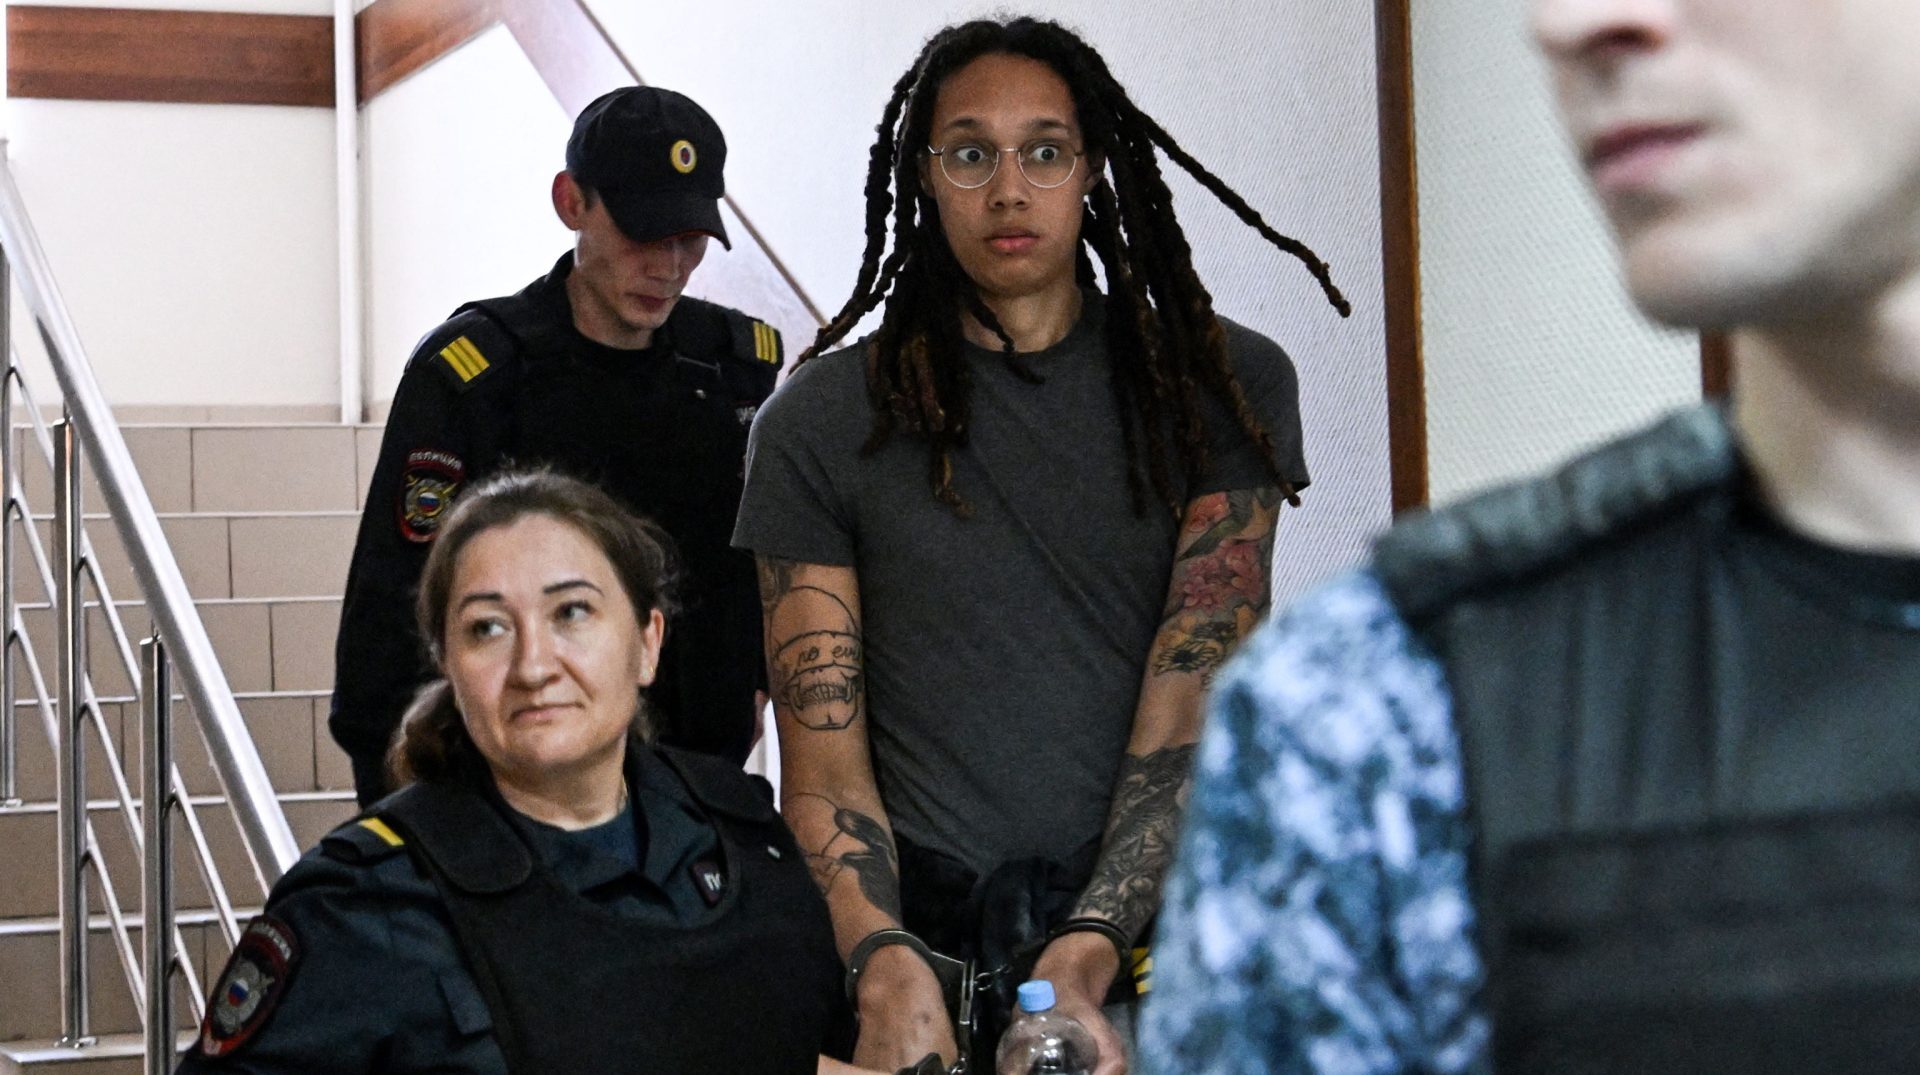 Brittany Griner's trial in Russia will begin on Friday - if found guilty, she will face up to 10 years